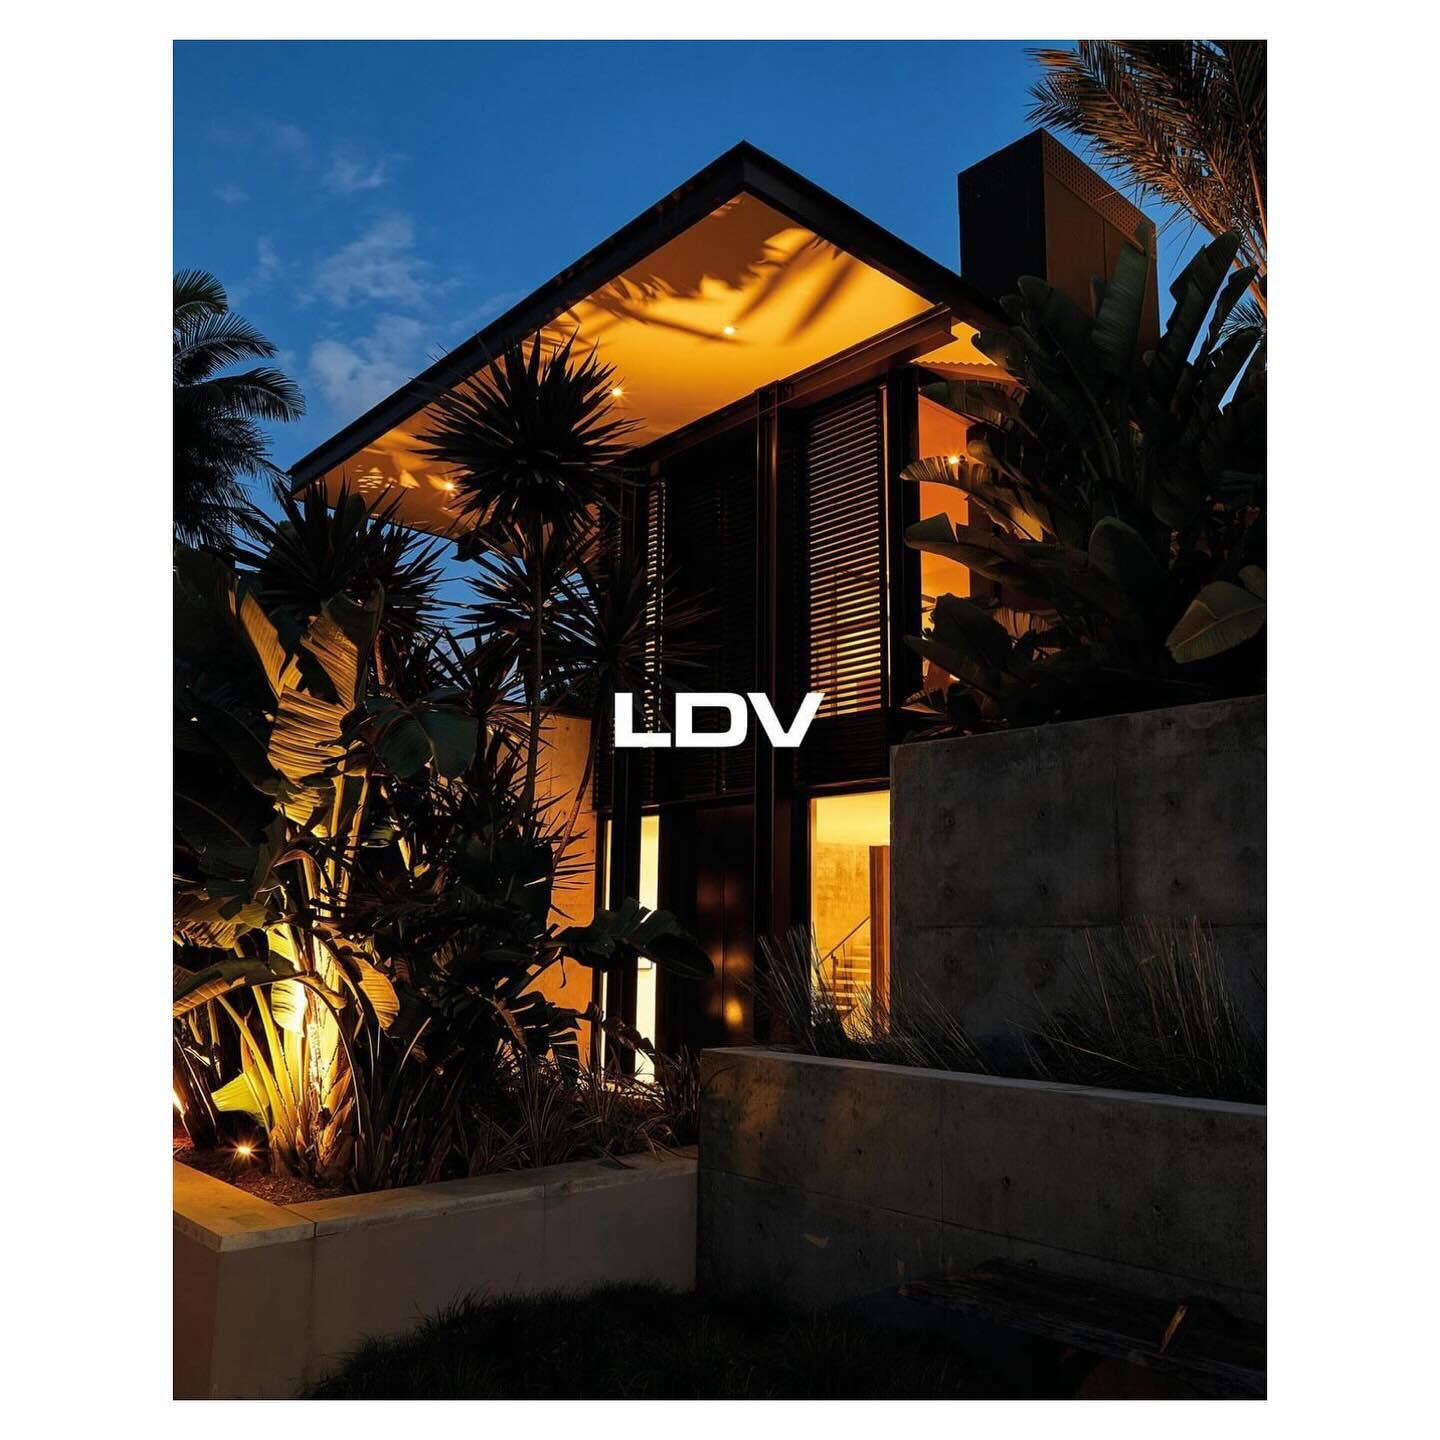 The Communications Bureau is pleased to announce its representation of LDV on 8899 Beverly for public relations. 

LDV on 8899 Beverly: Design in Residence is a curated retail pop-up of rotating design and art created by creative directors, Birta Ola